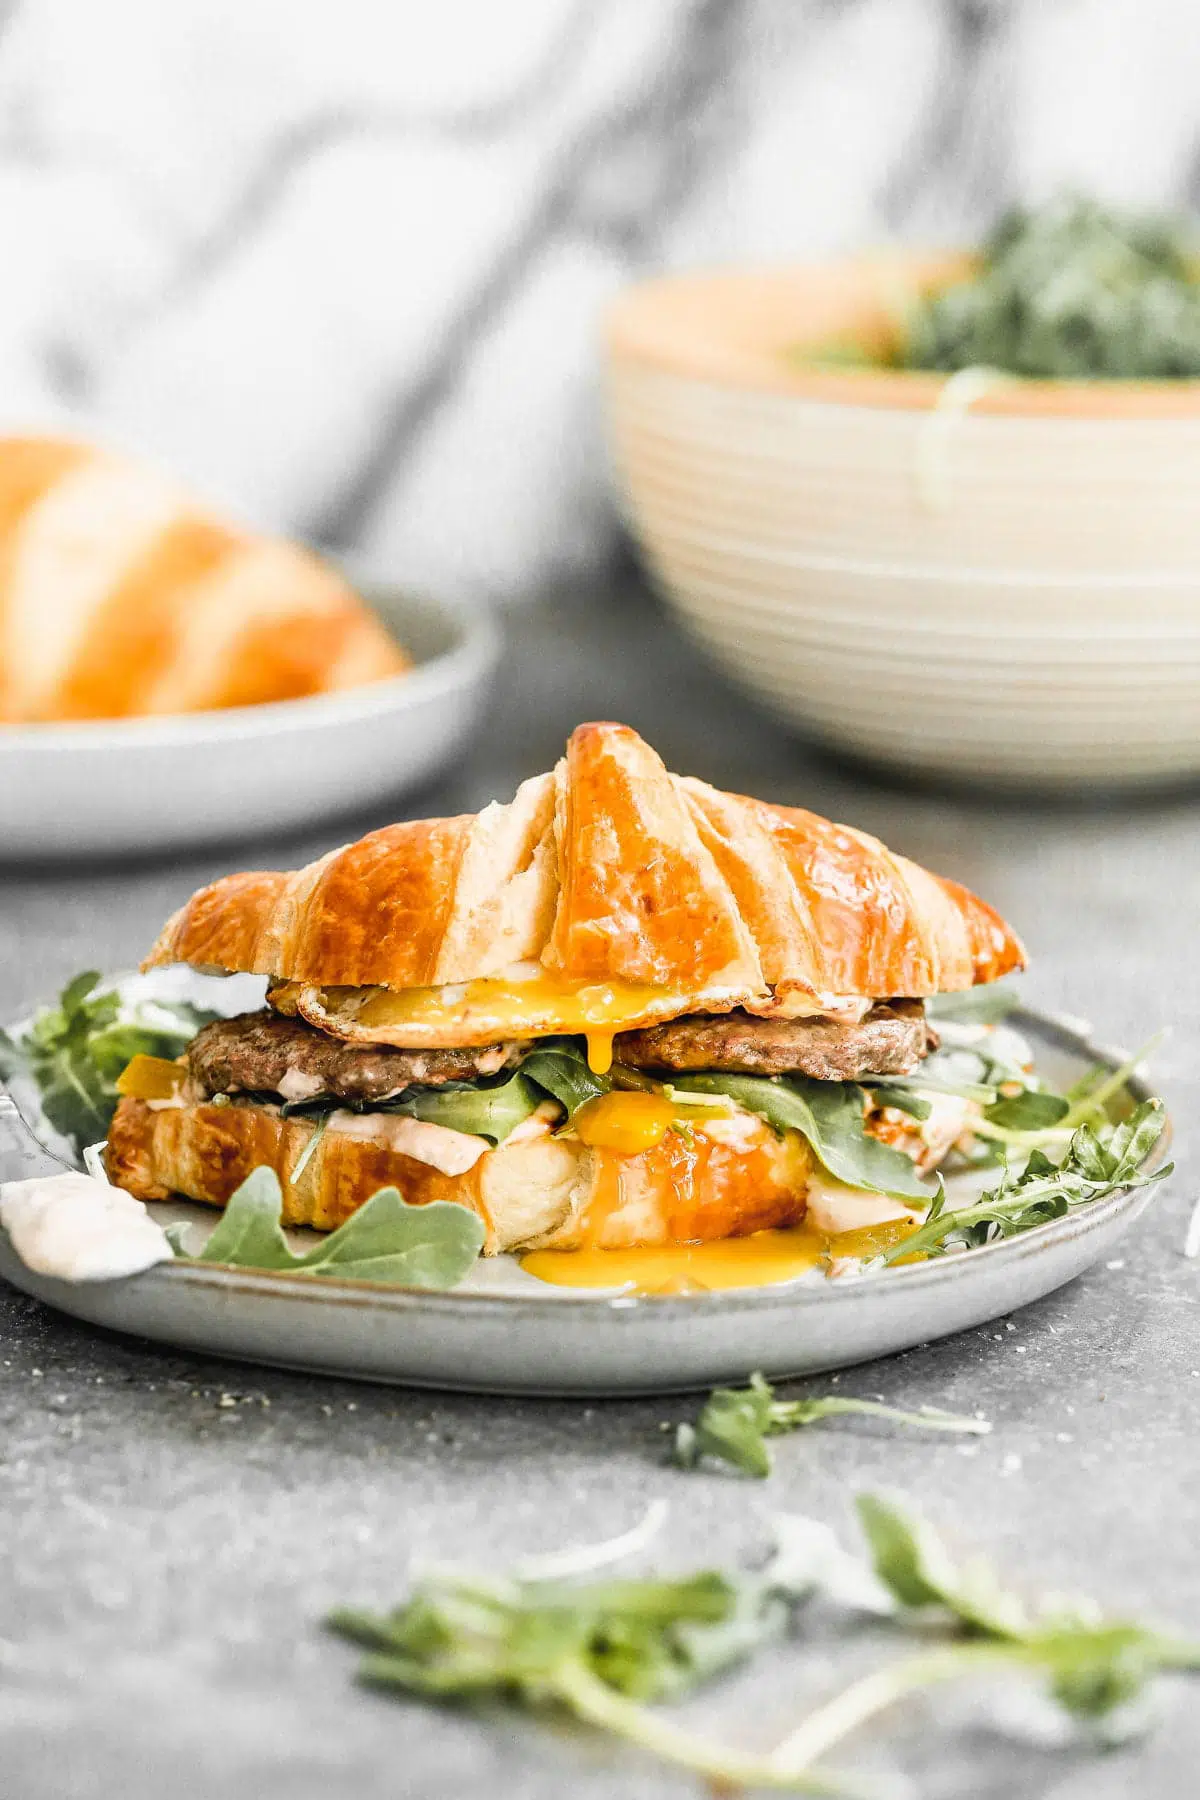 Calling all breakfast lovers! Our Croissant Breakfast Sandwich is slathered with a spicy salsa cream cheese, topped with smoky green chiles, peppery arugula, salty Turkey Sausage, and of course, a drippy over-easy egg. Hearty, messy, and oh-so delicious.